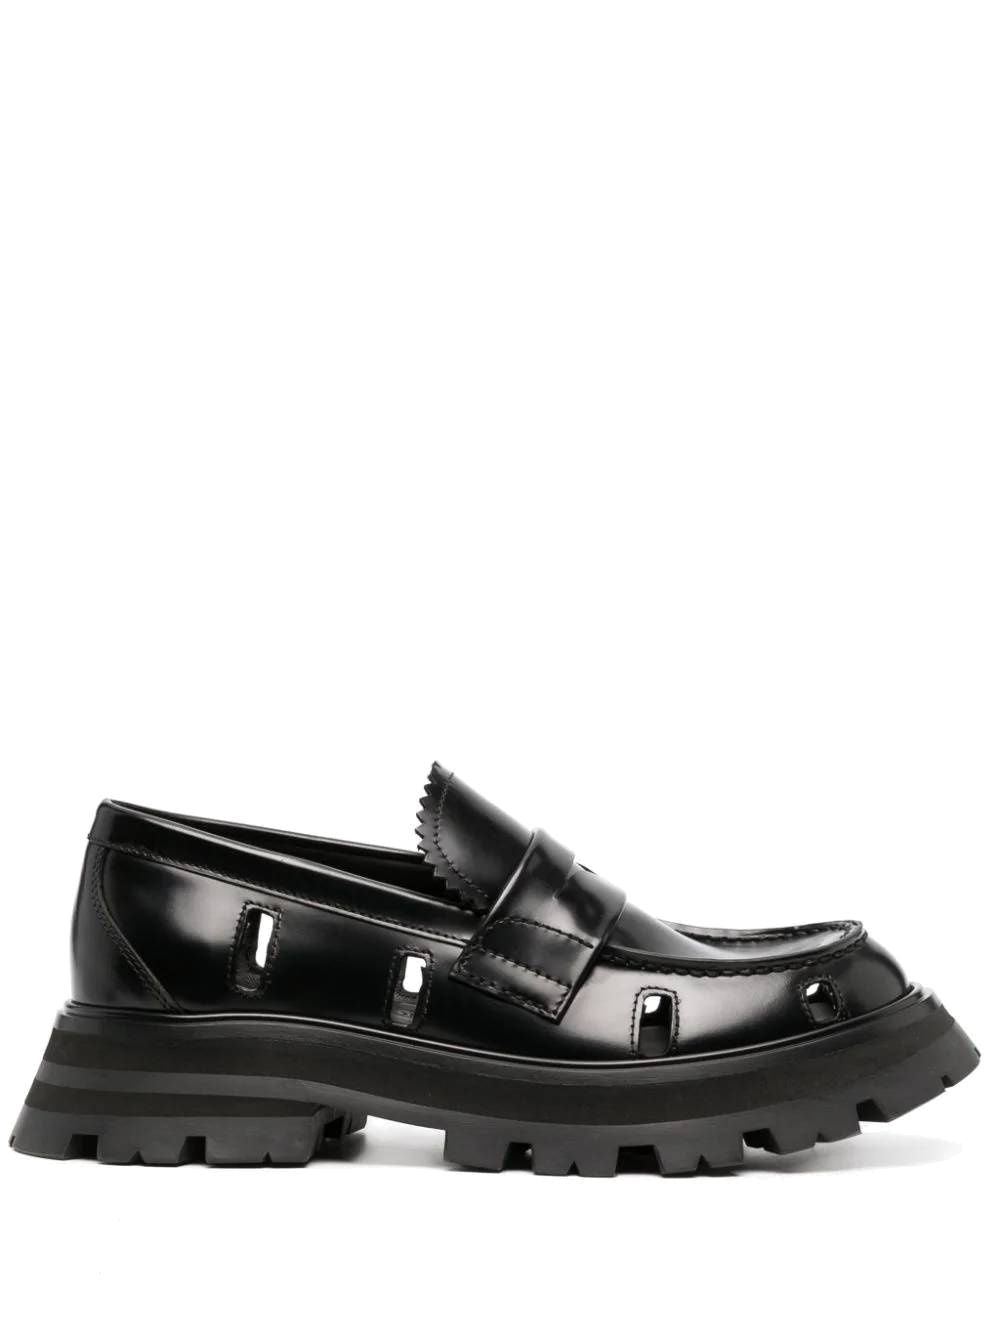 Wander loafers in thick leather